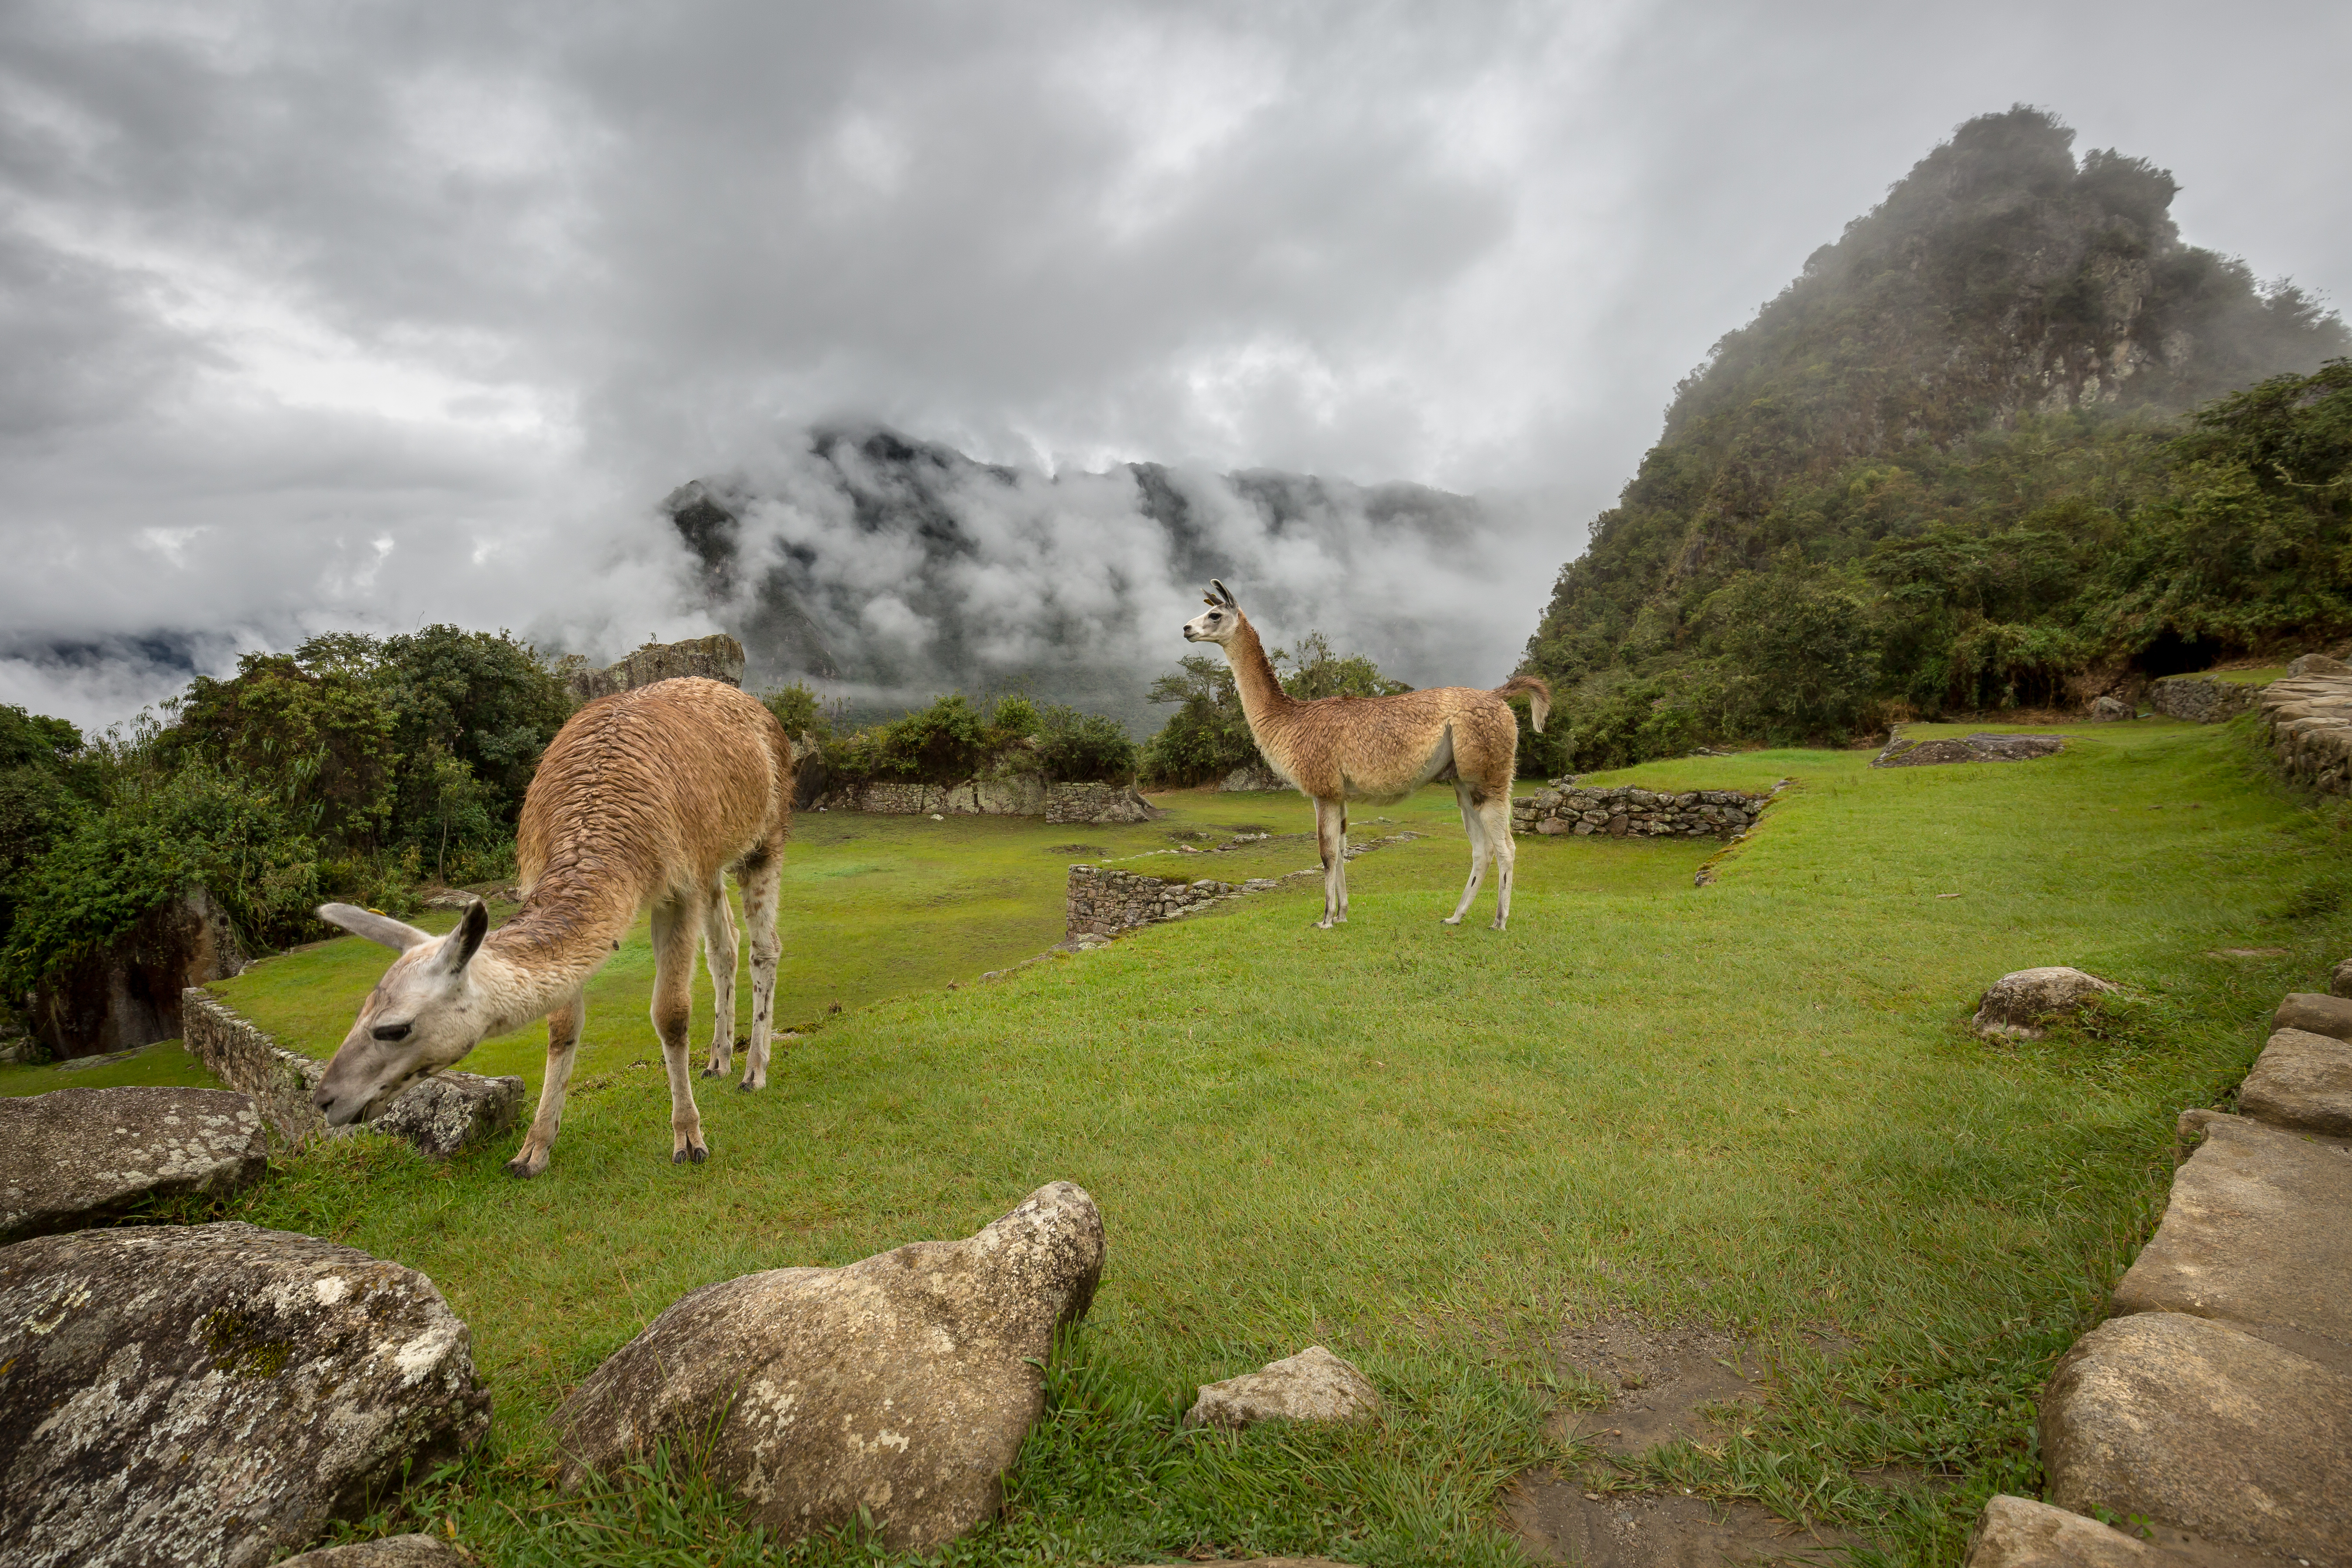 Machu Picchu has strictly enforced rules for entering the site. This is to not compromise the ancent Inca citadel or damage its historic structures. Any Machu Picchu vacation package complies with these rules so that Machu Picchu is preserved for future generations.